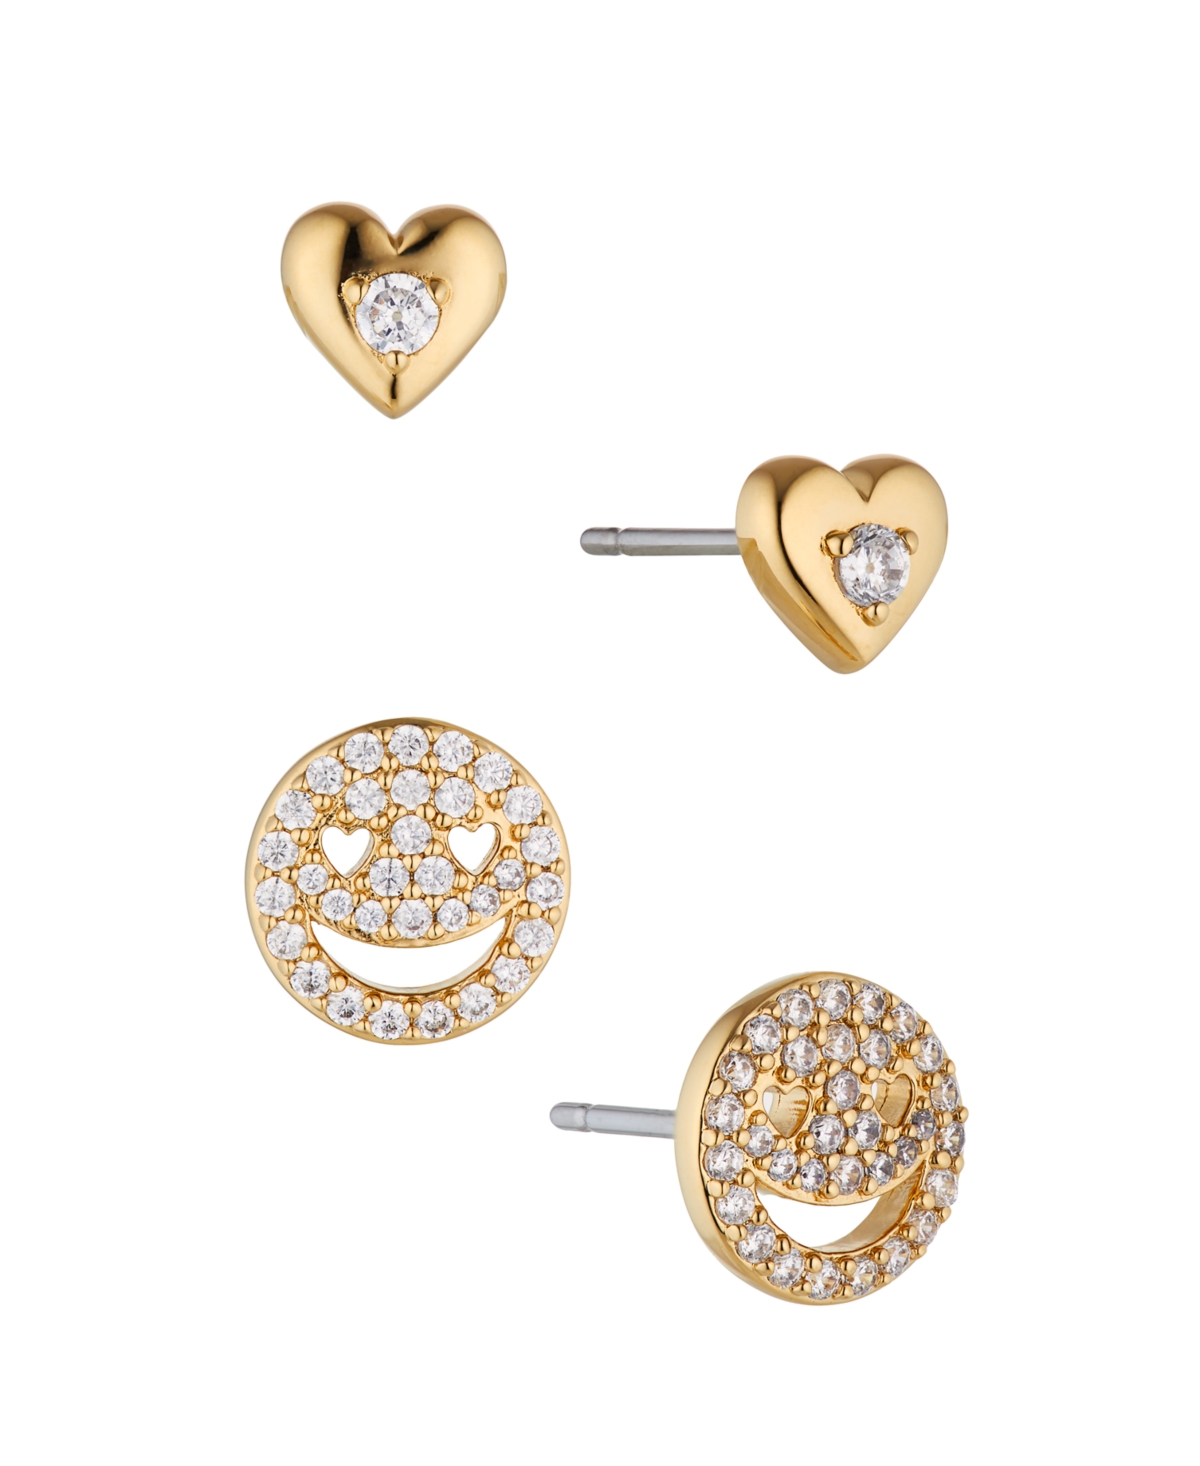 Heart Shape Stud and Smiley Face Earring Set, 4 Pieces - Gold-Tone